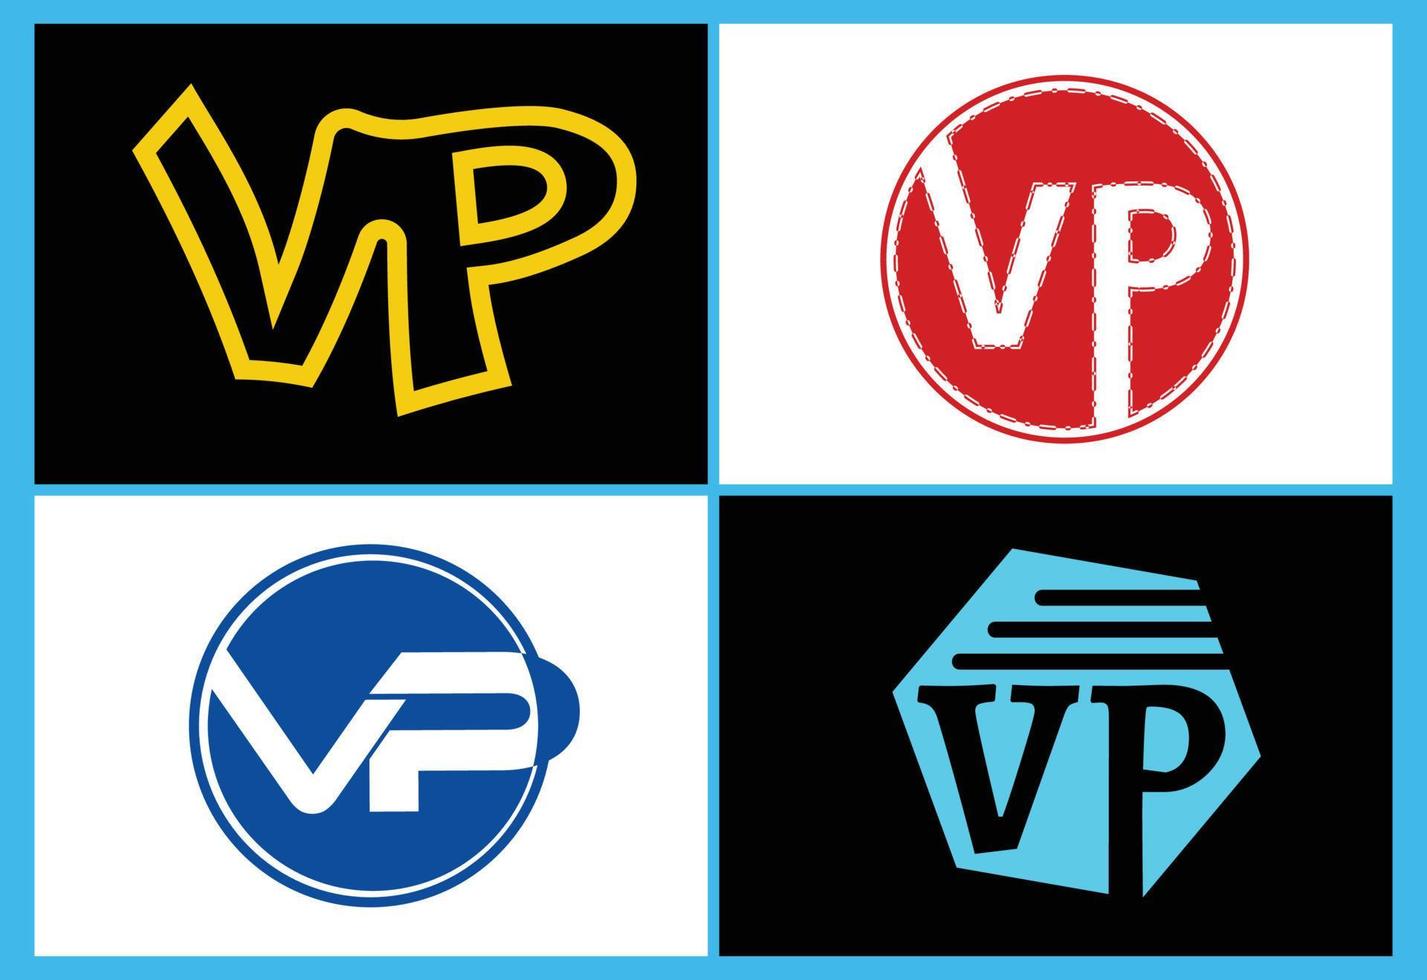 VP logo, sticker, icon and t shirt design template vector